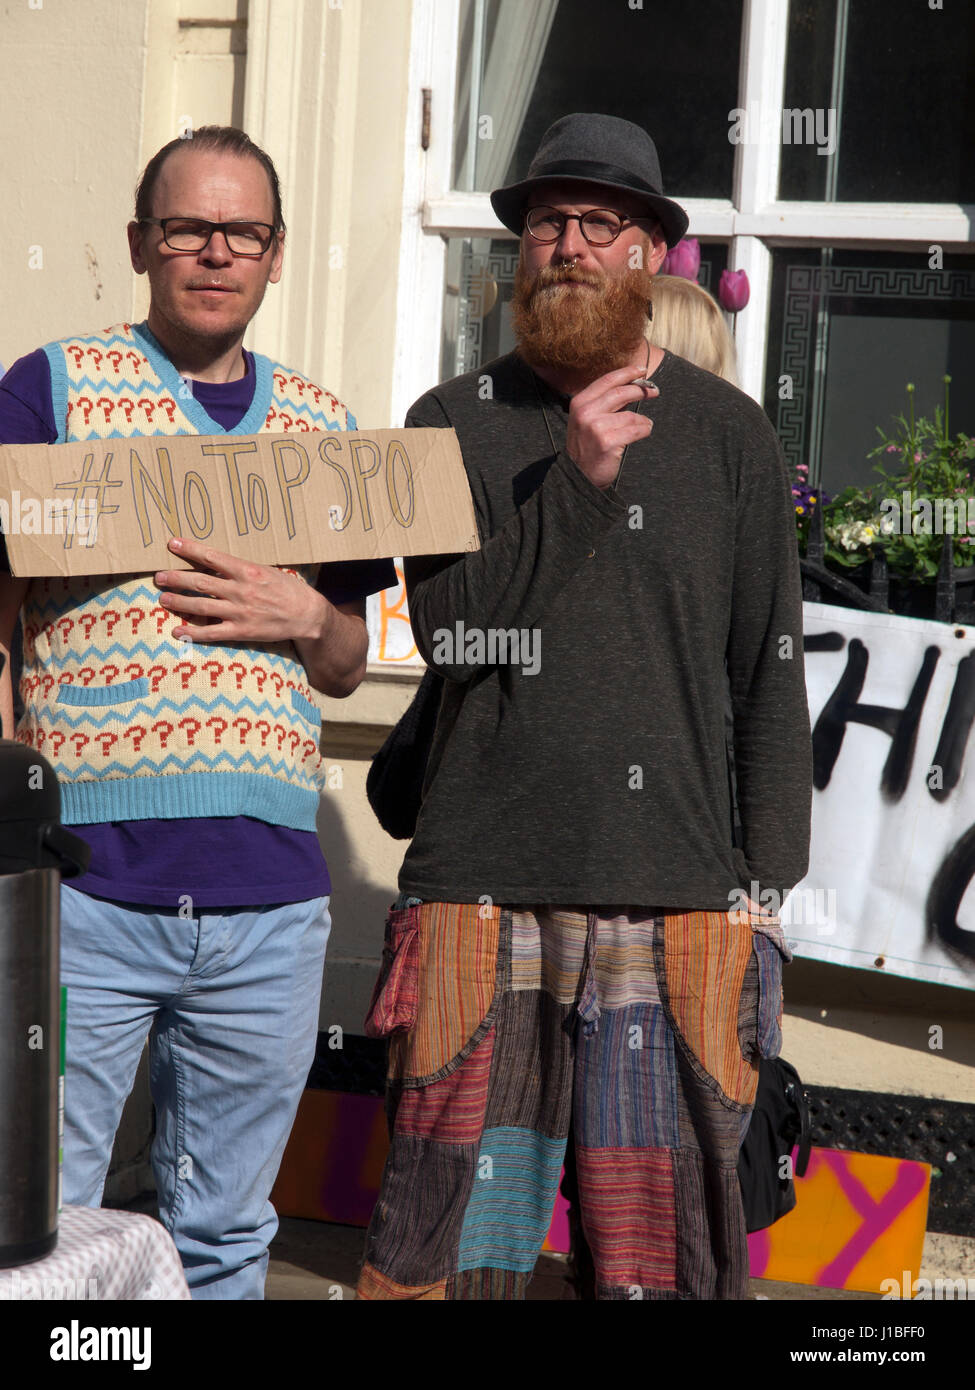 A protest in Brighton against the introduction of Public Space Protection Orders Stock Photo